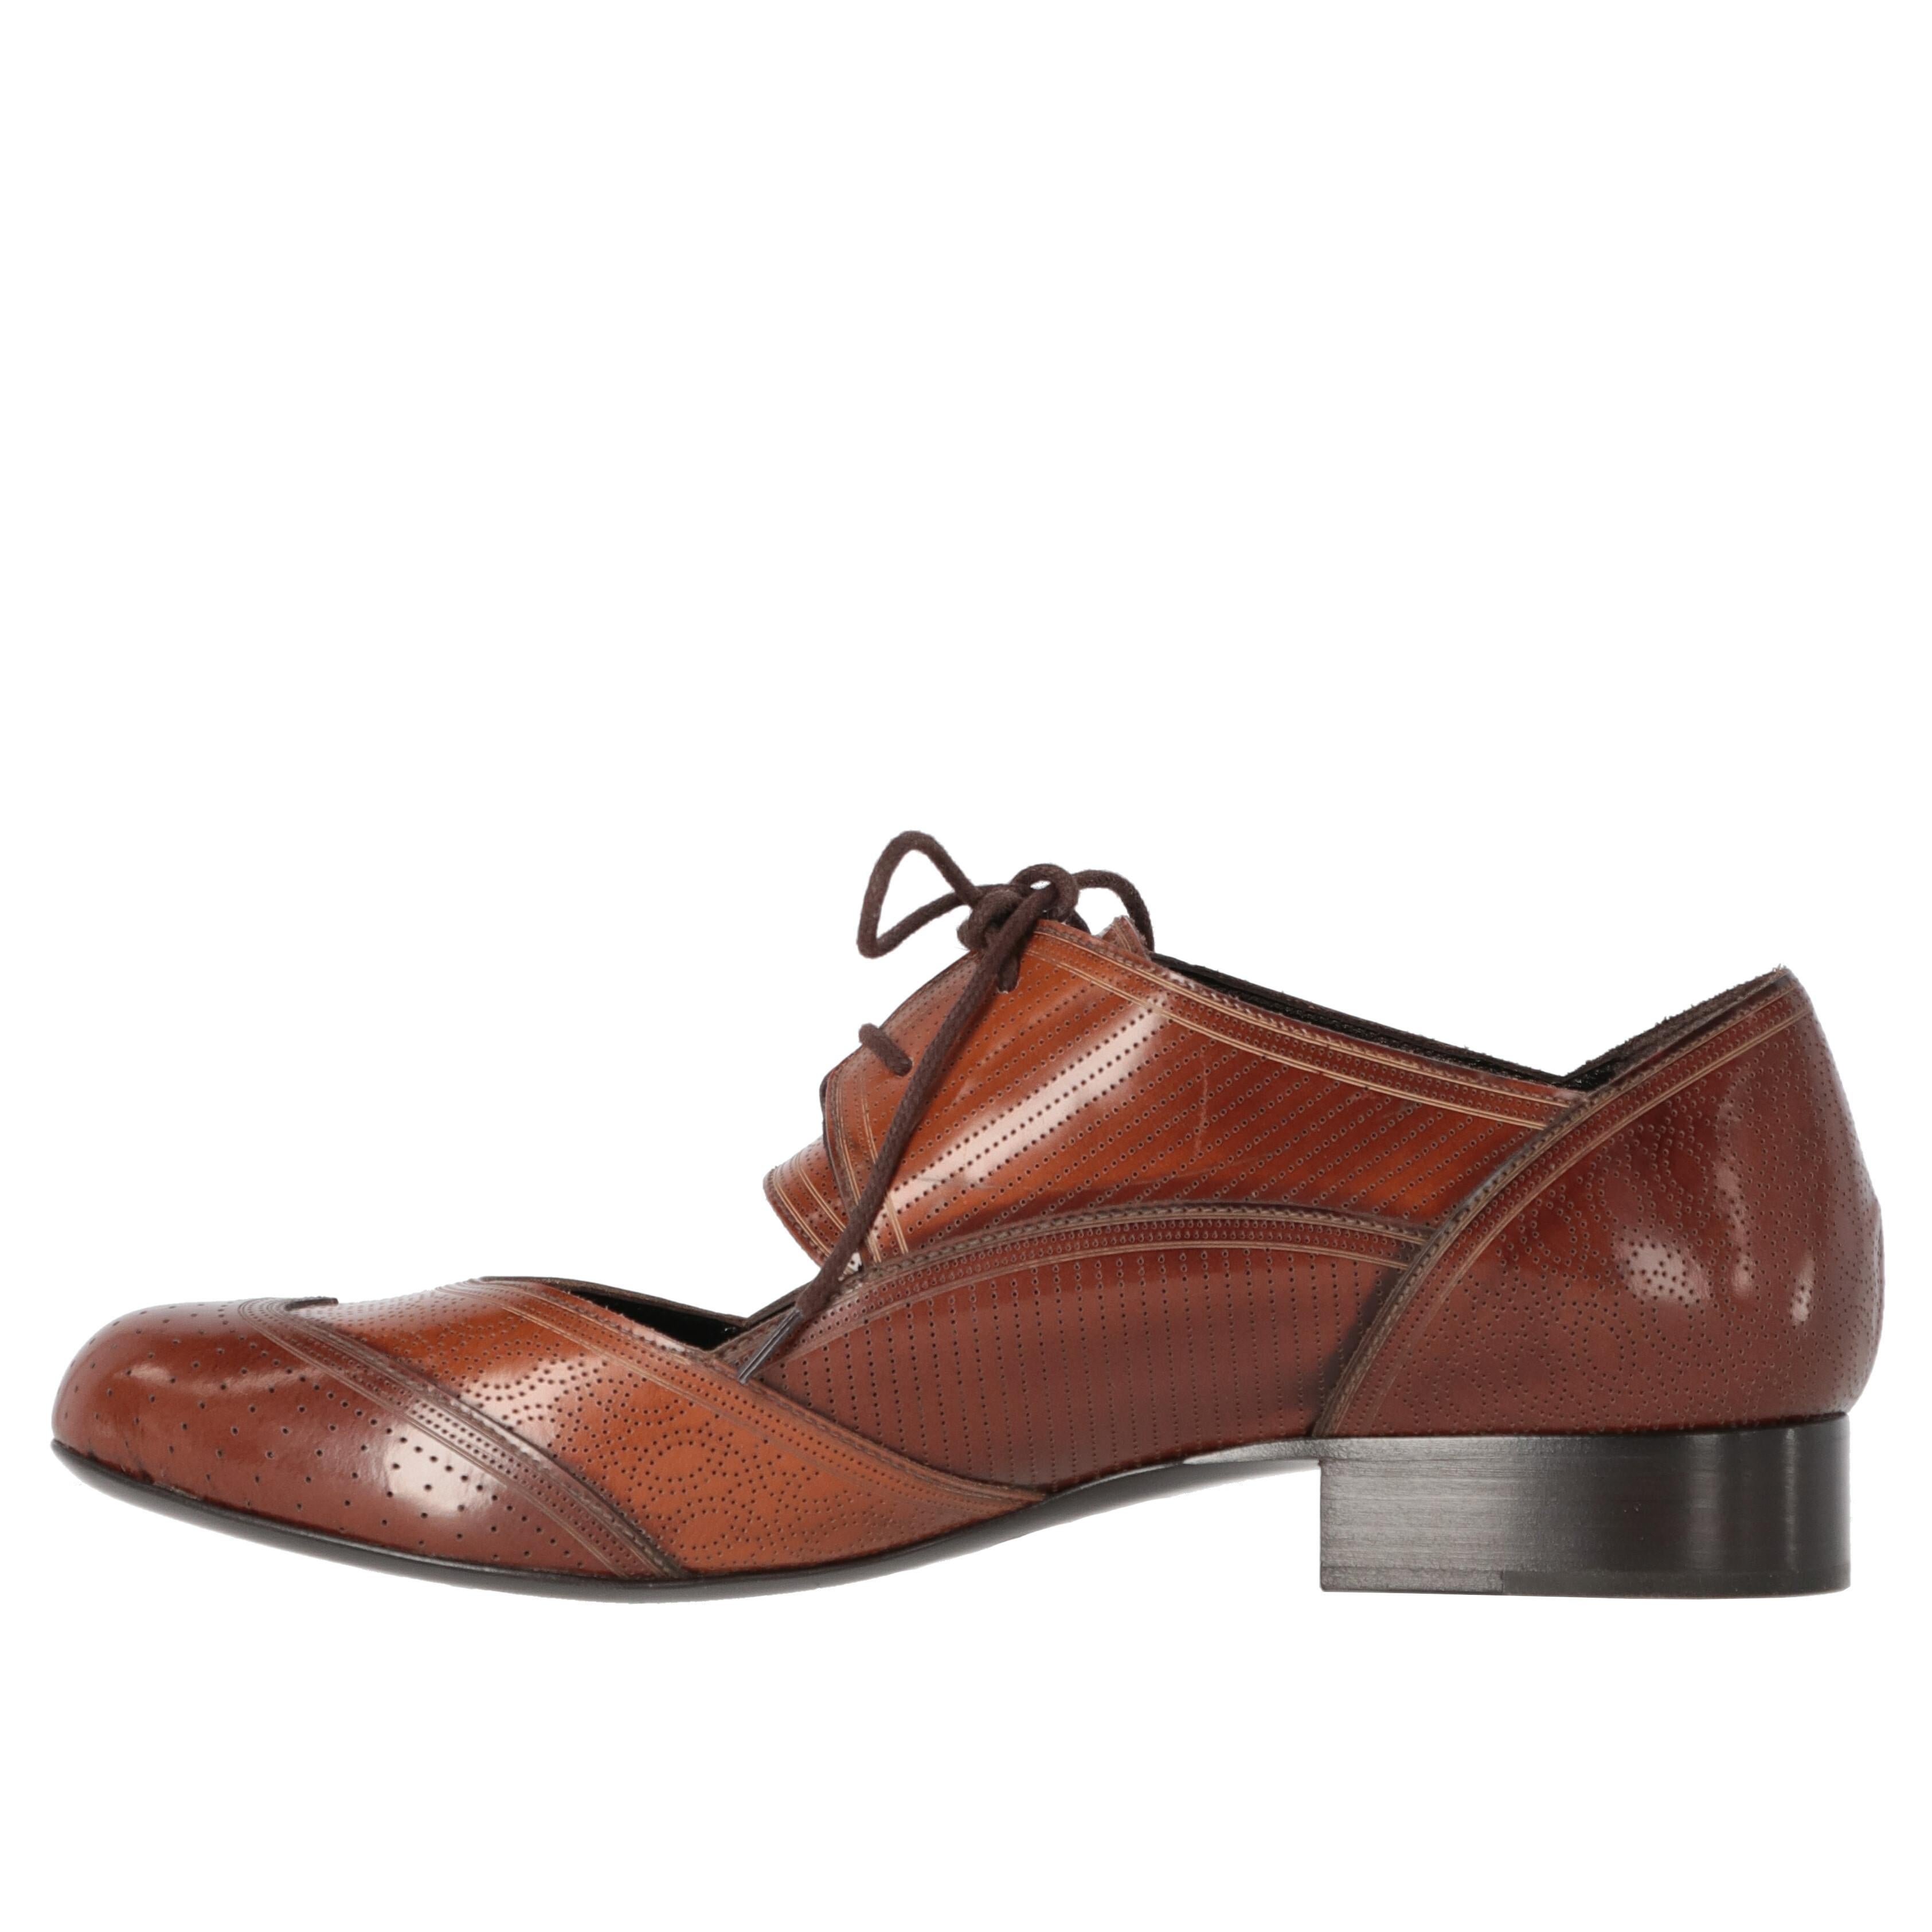 Fendi genuine leather lace-up brogue shoes in shades of brown, with classic decorative perforations and cut-out detail on the instep. 

The shoes show very light signs on the leather, as shown in the pictures.

Years: 2010s

Made in Italy

Size: 39